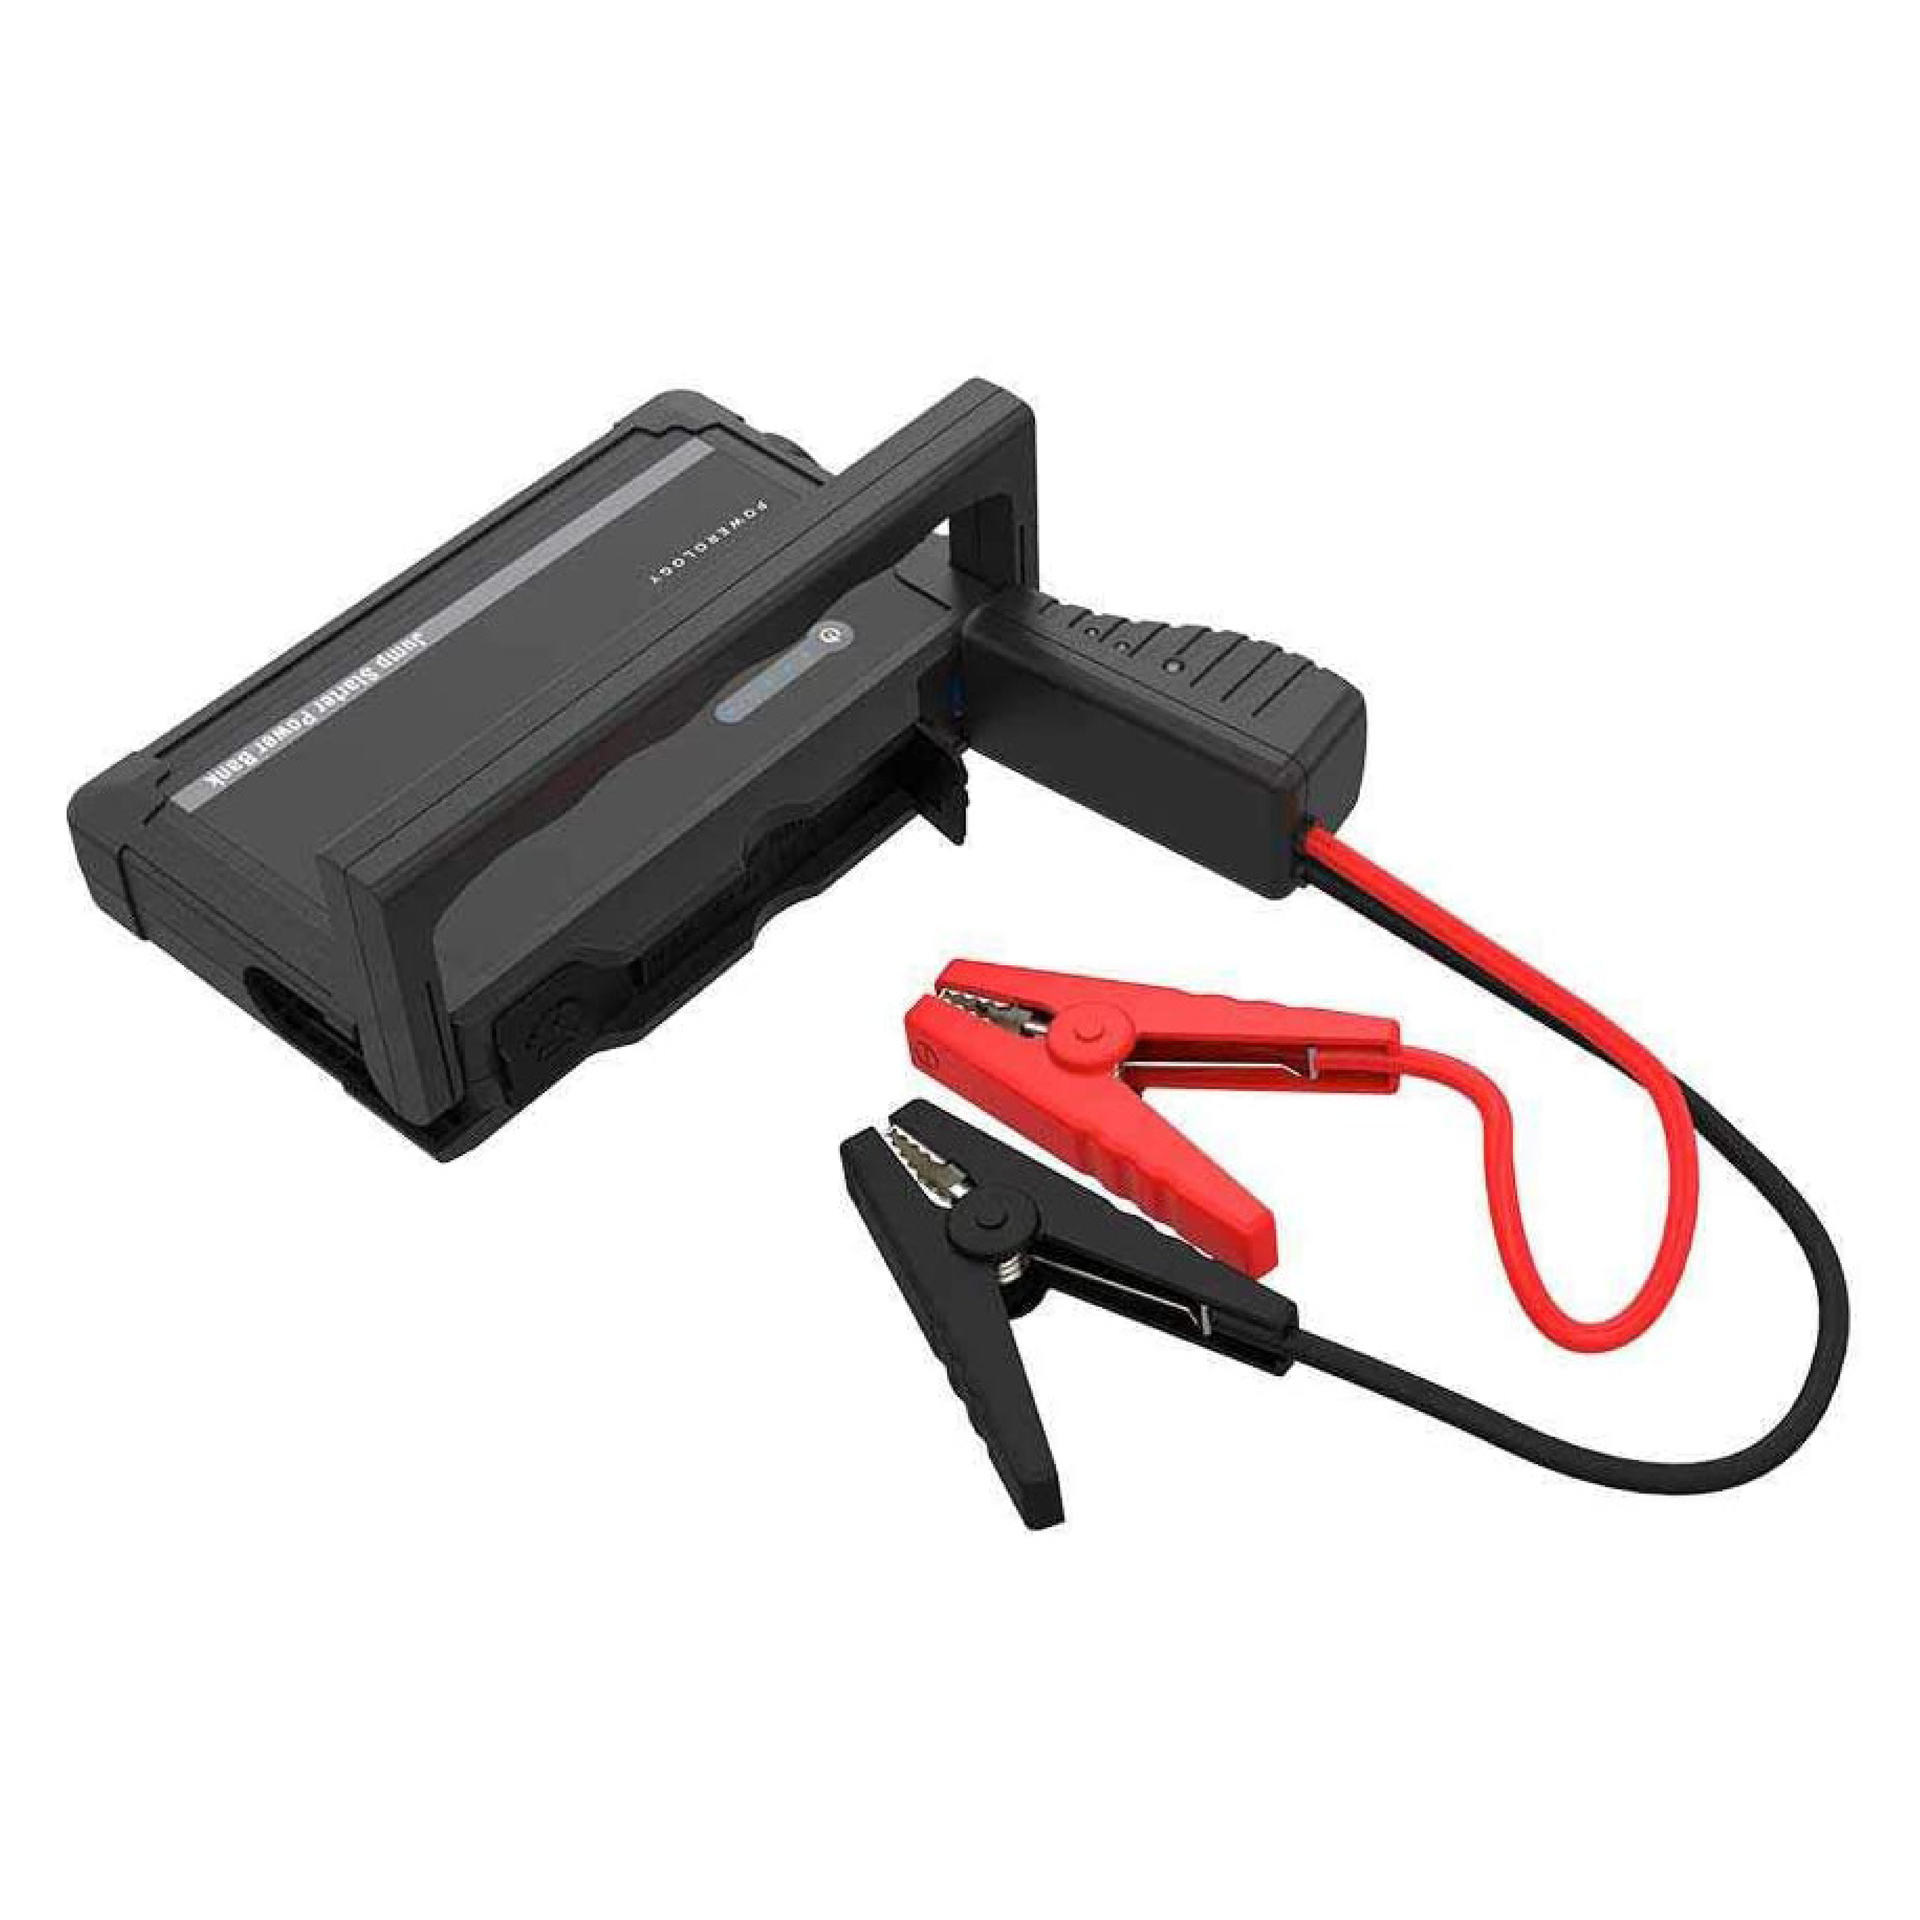 Powerology Multi-Port Jump Starter Power Bank: Power and Safety